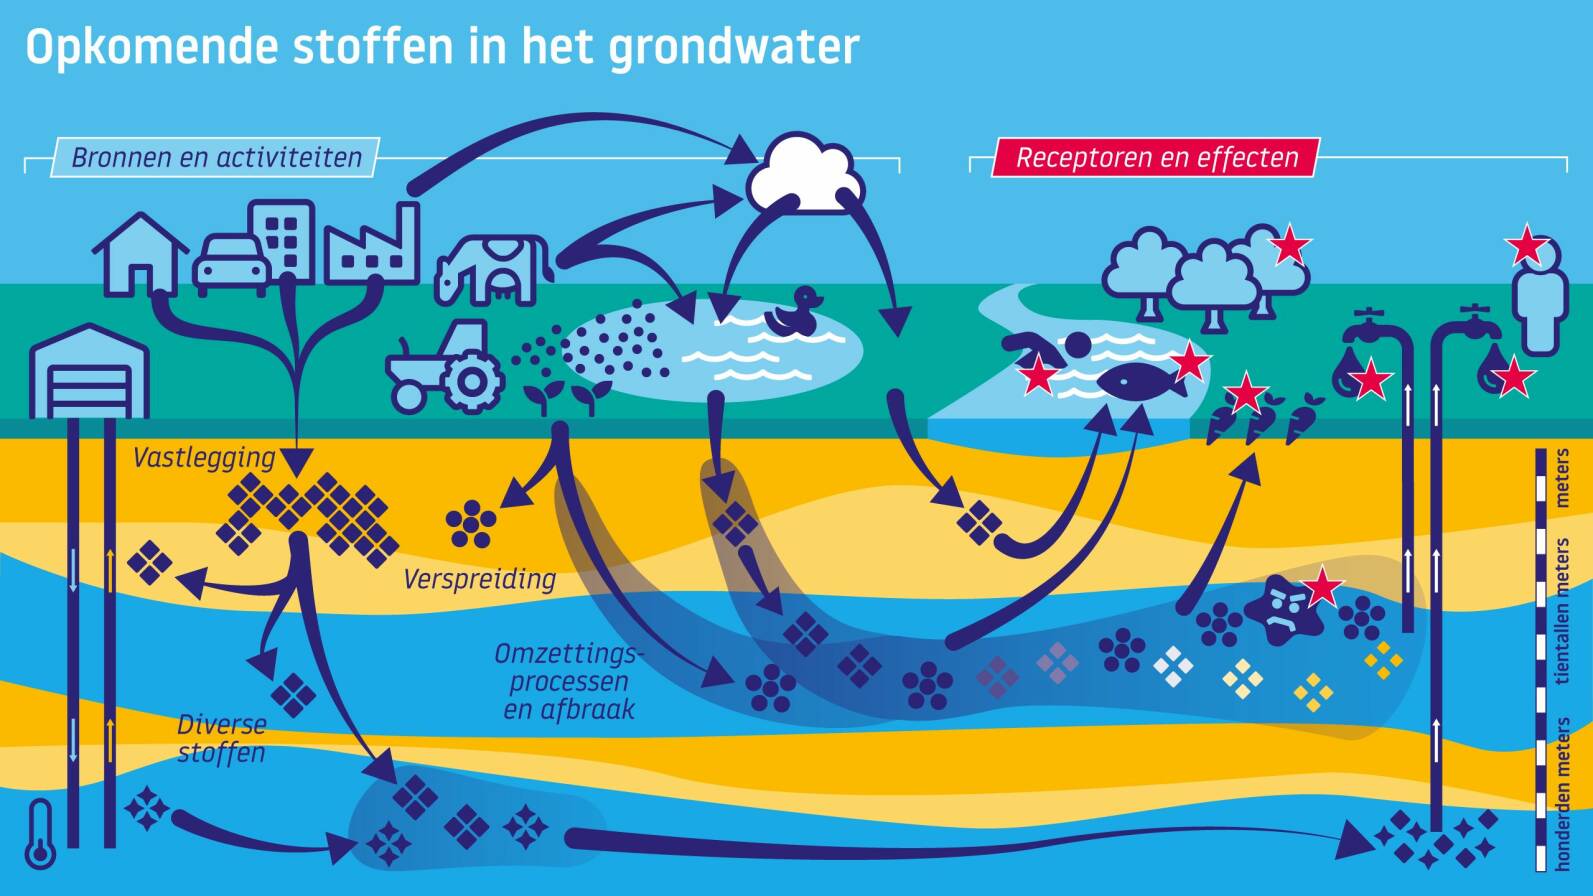 Infographic over opkomende stoffen in grondwater